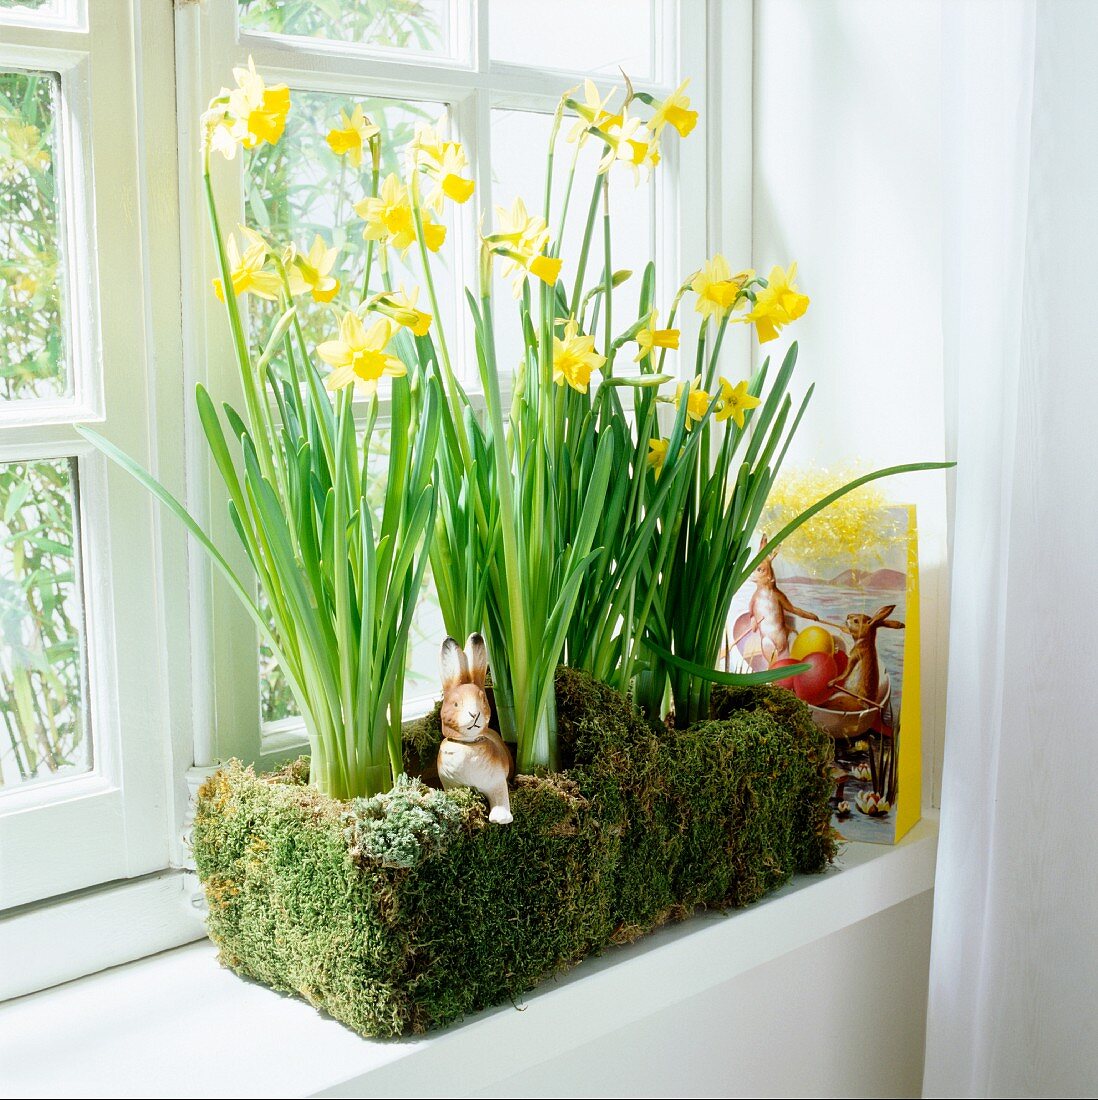 Daffodils in a window box decorated with moss and Easter bunnies on a window sill